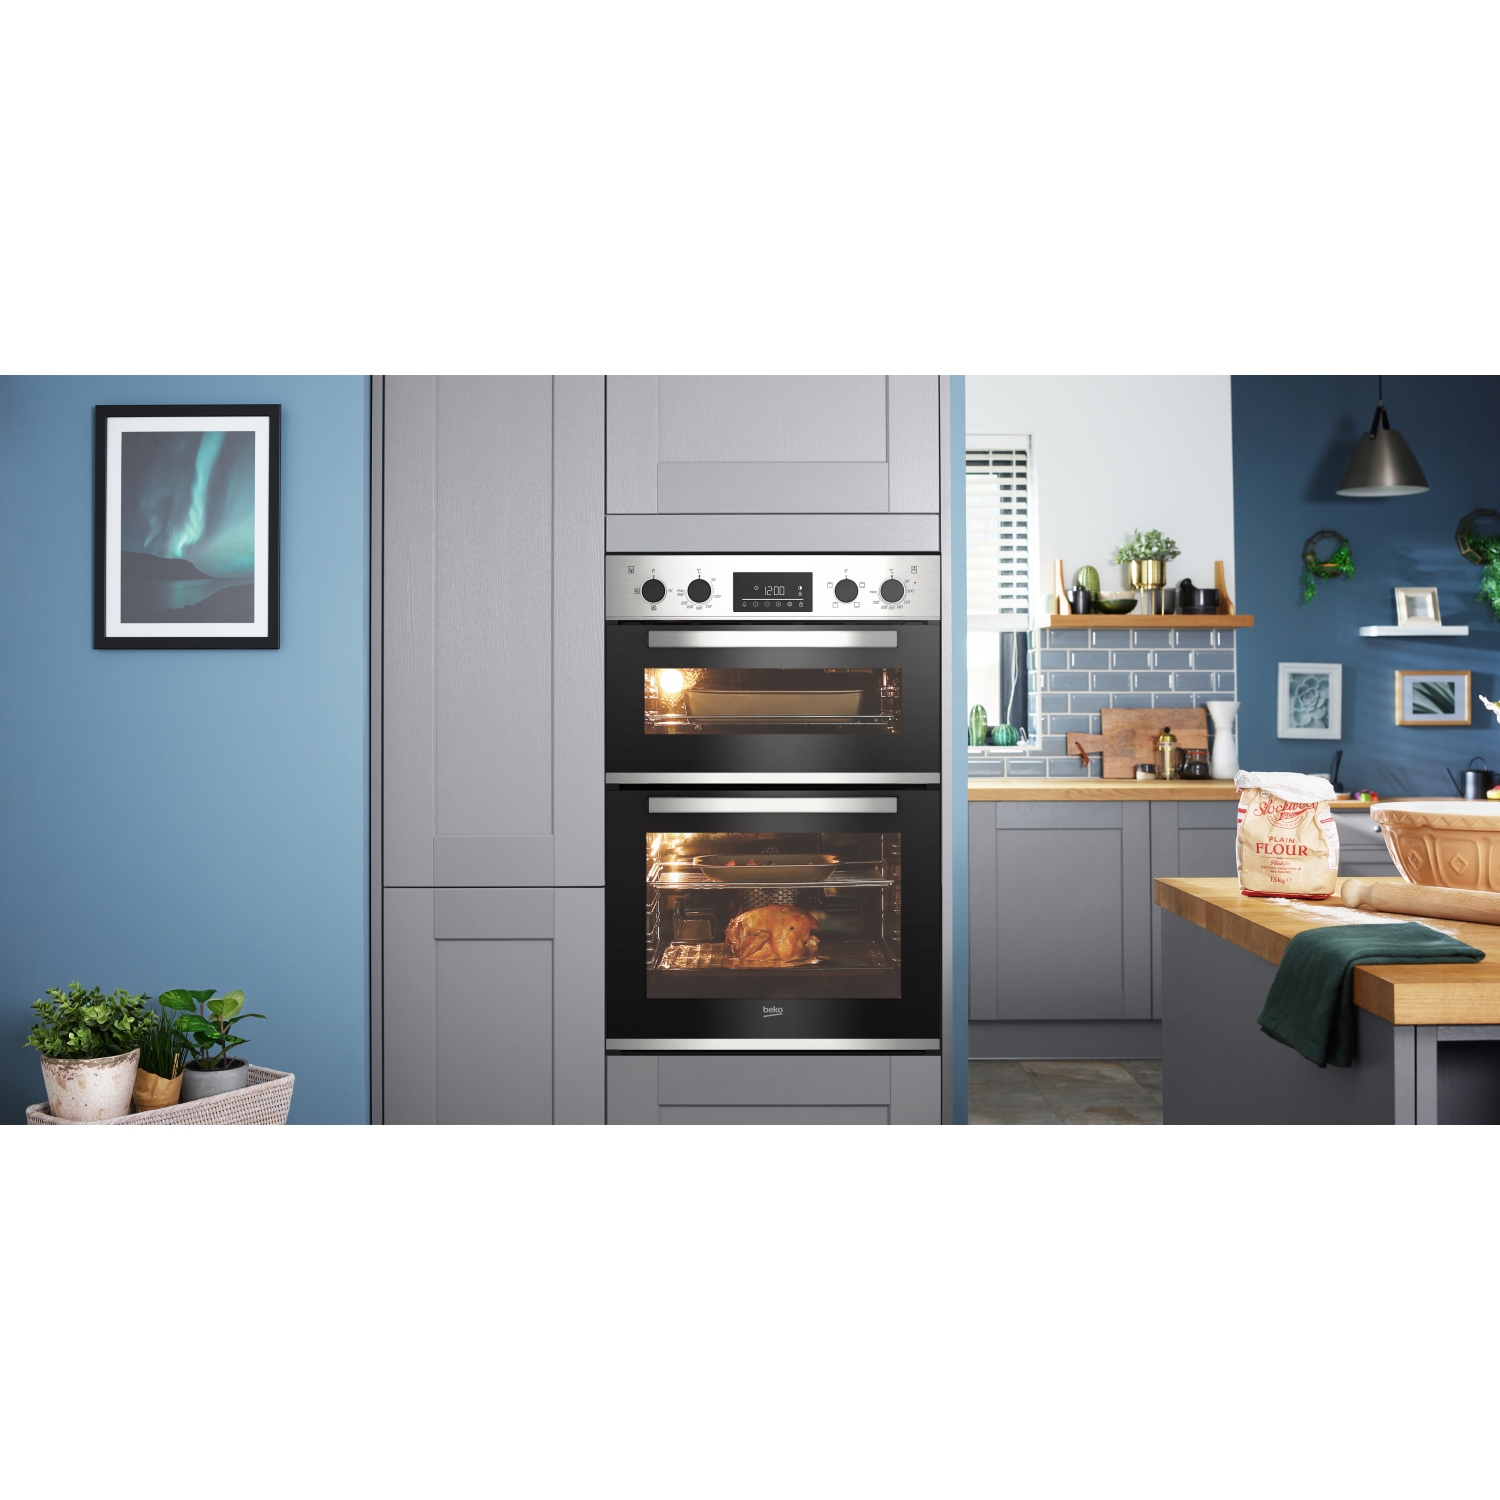 Beko CDFY22309X 60cm Built In High Specification RecycledNet&Acirc;&reg; Double Oven - Stainless Steel - 5